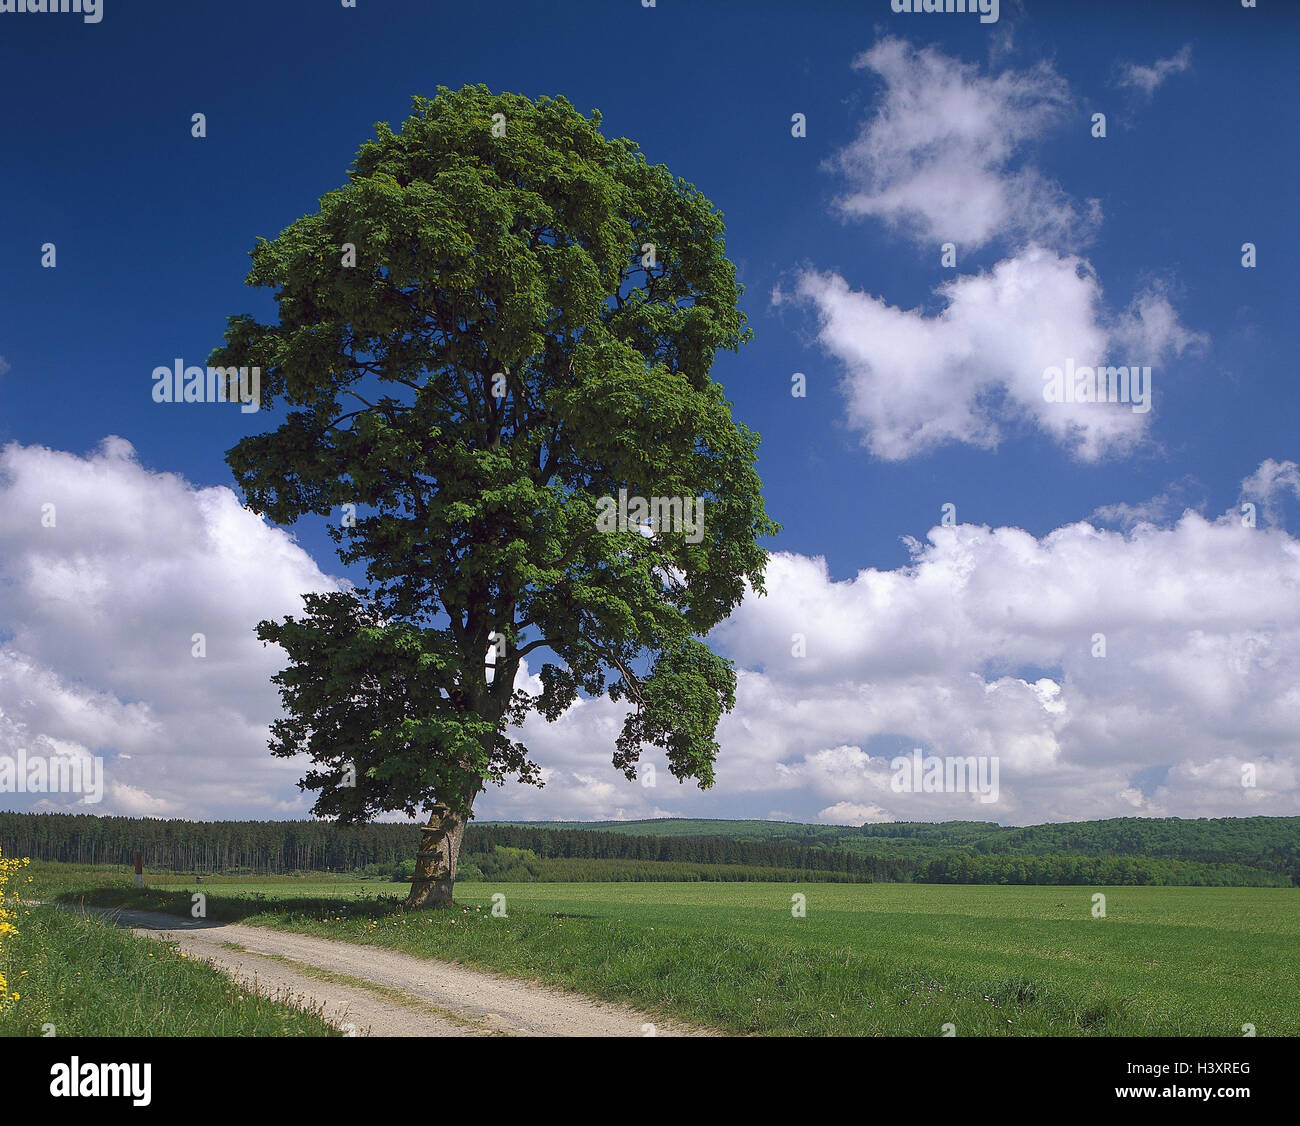 Maple, Acer spec., country lane, wood, Woleknhimmel, nature, scenery, trees, tree, foliage woods, hardwood, broad-leaved tree, maple plants, Aceraceae, maple tree, solitaire tree, meadow, field, way Stock Photo